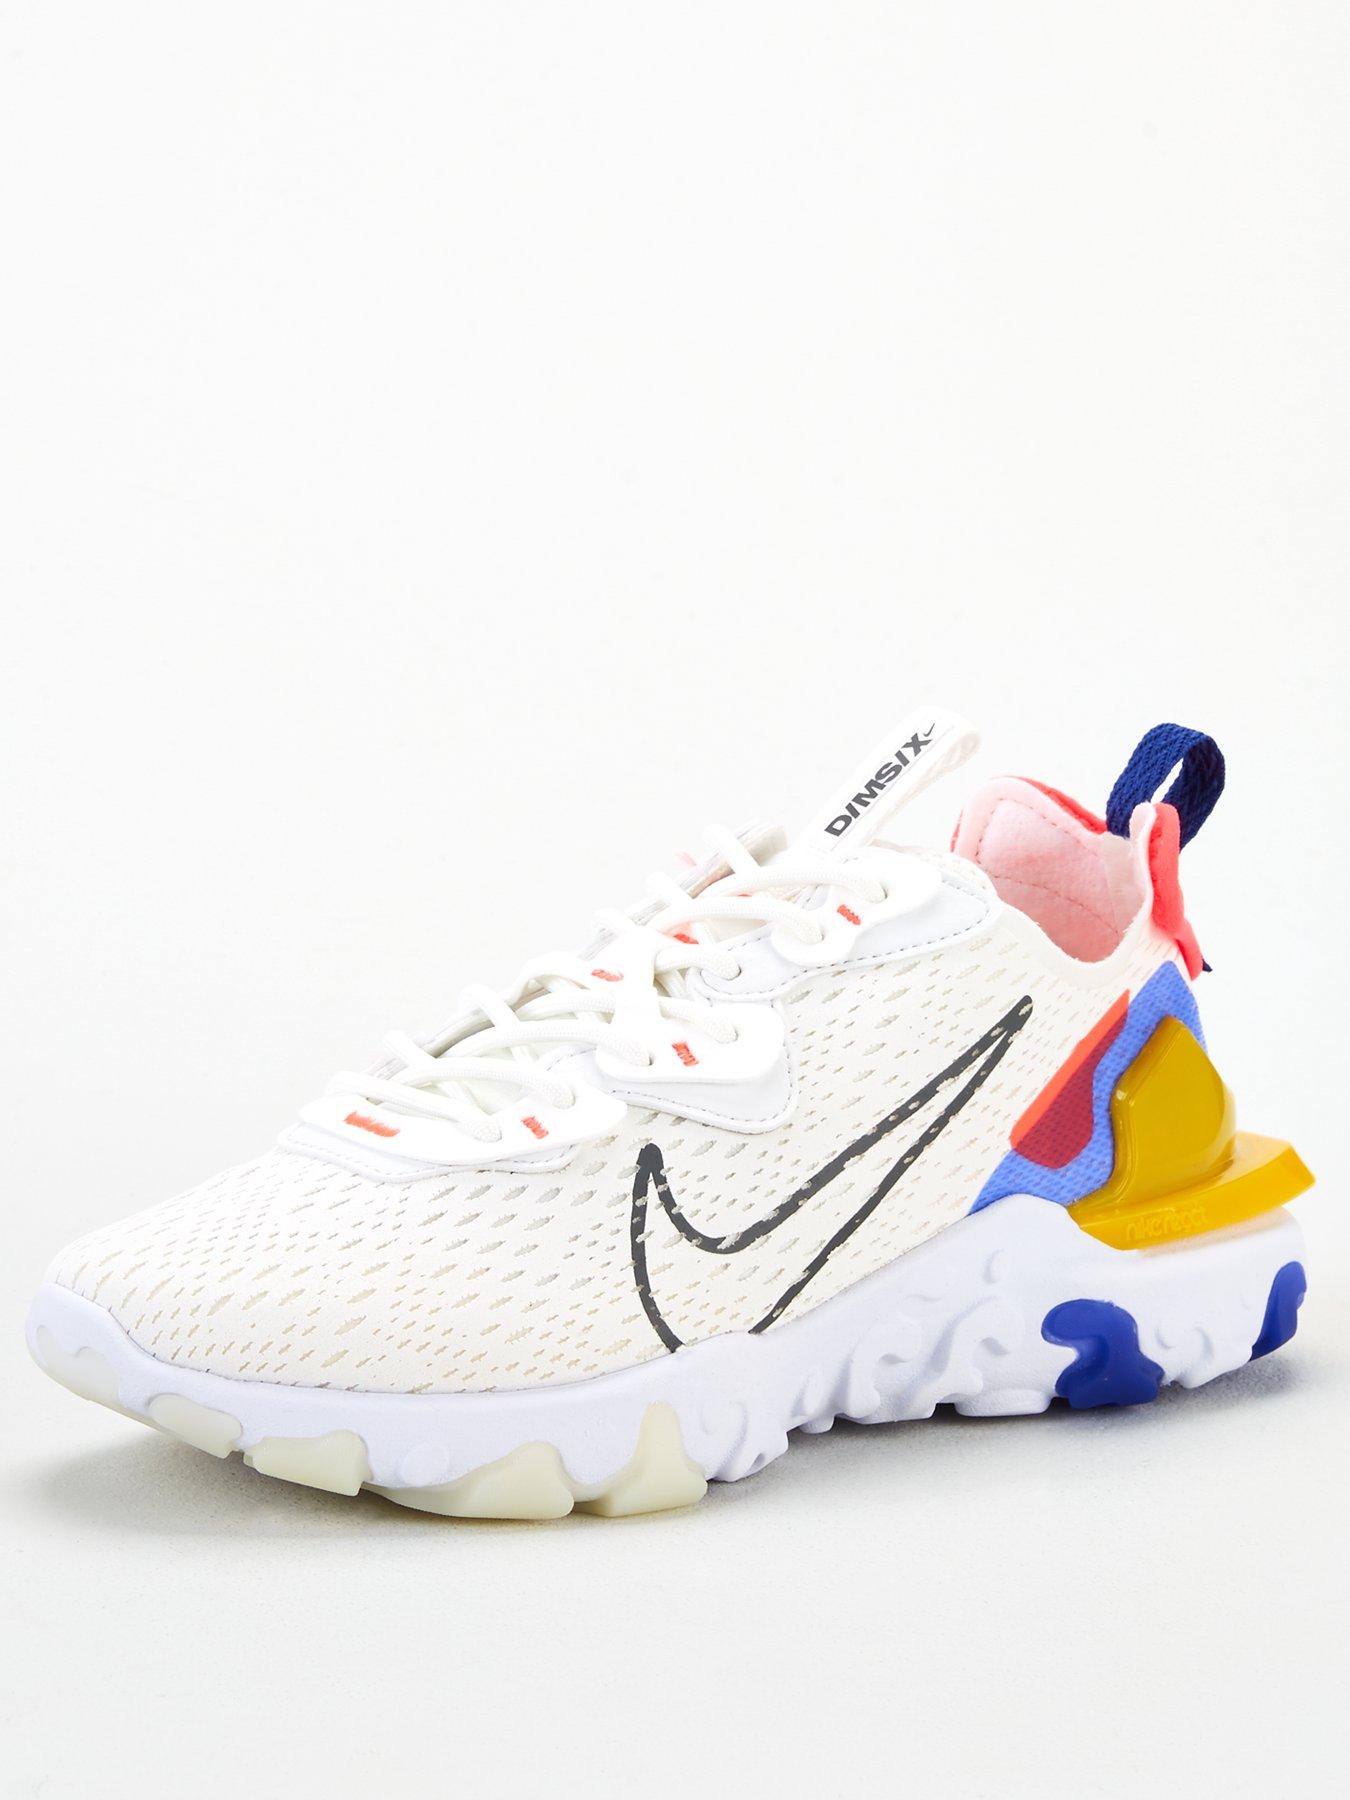 nike react vision pink and white